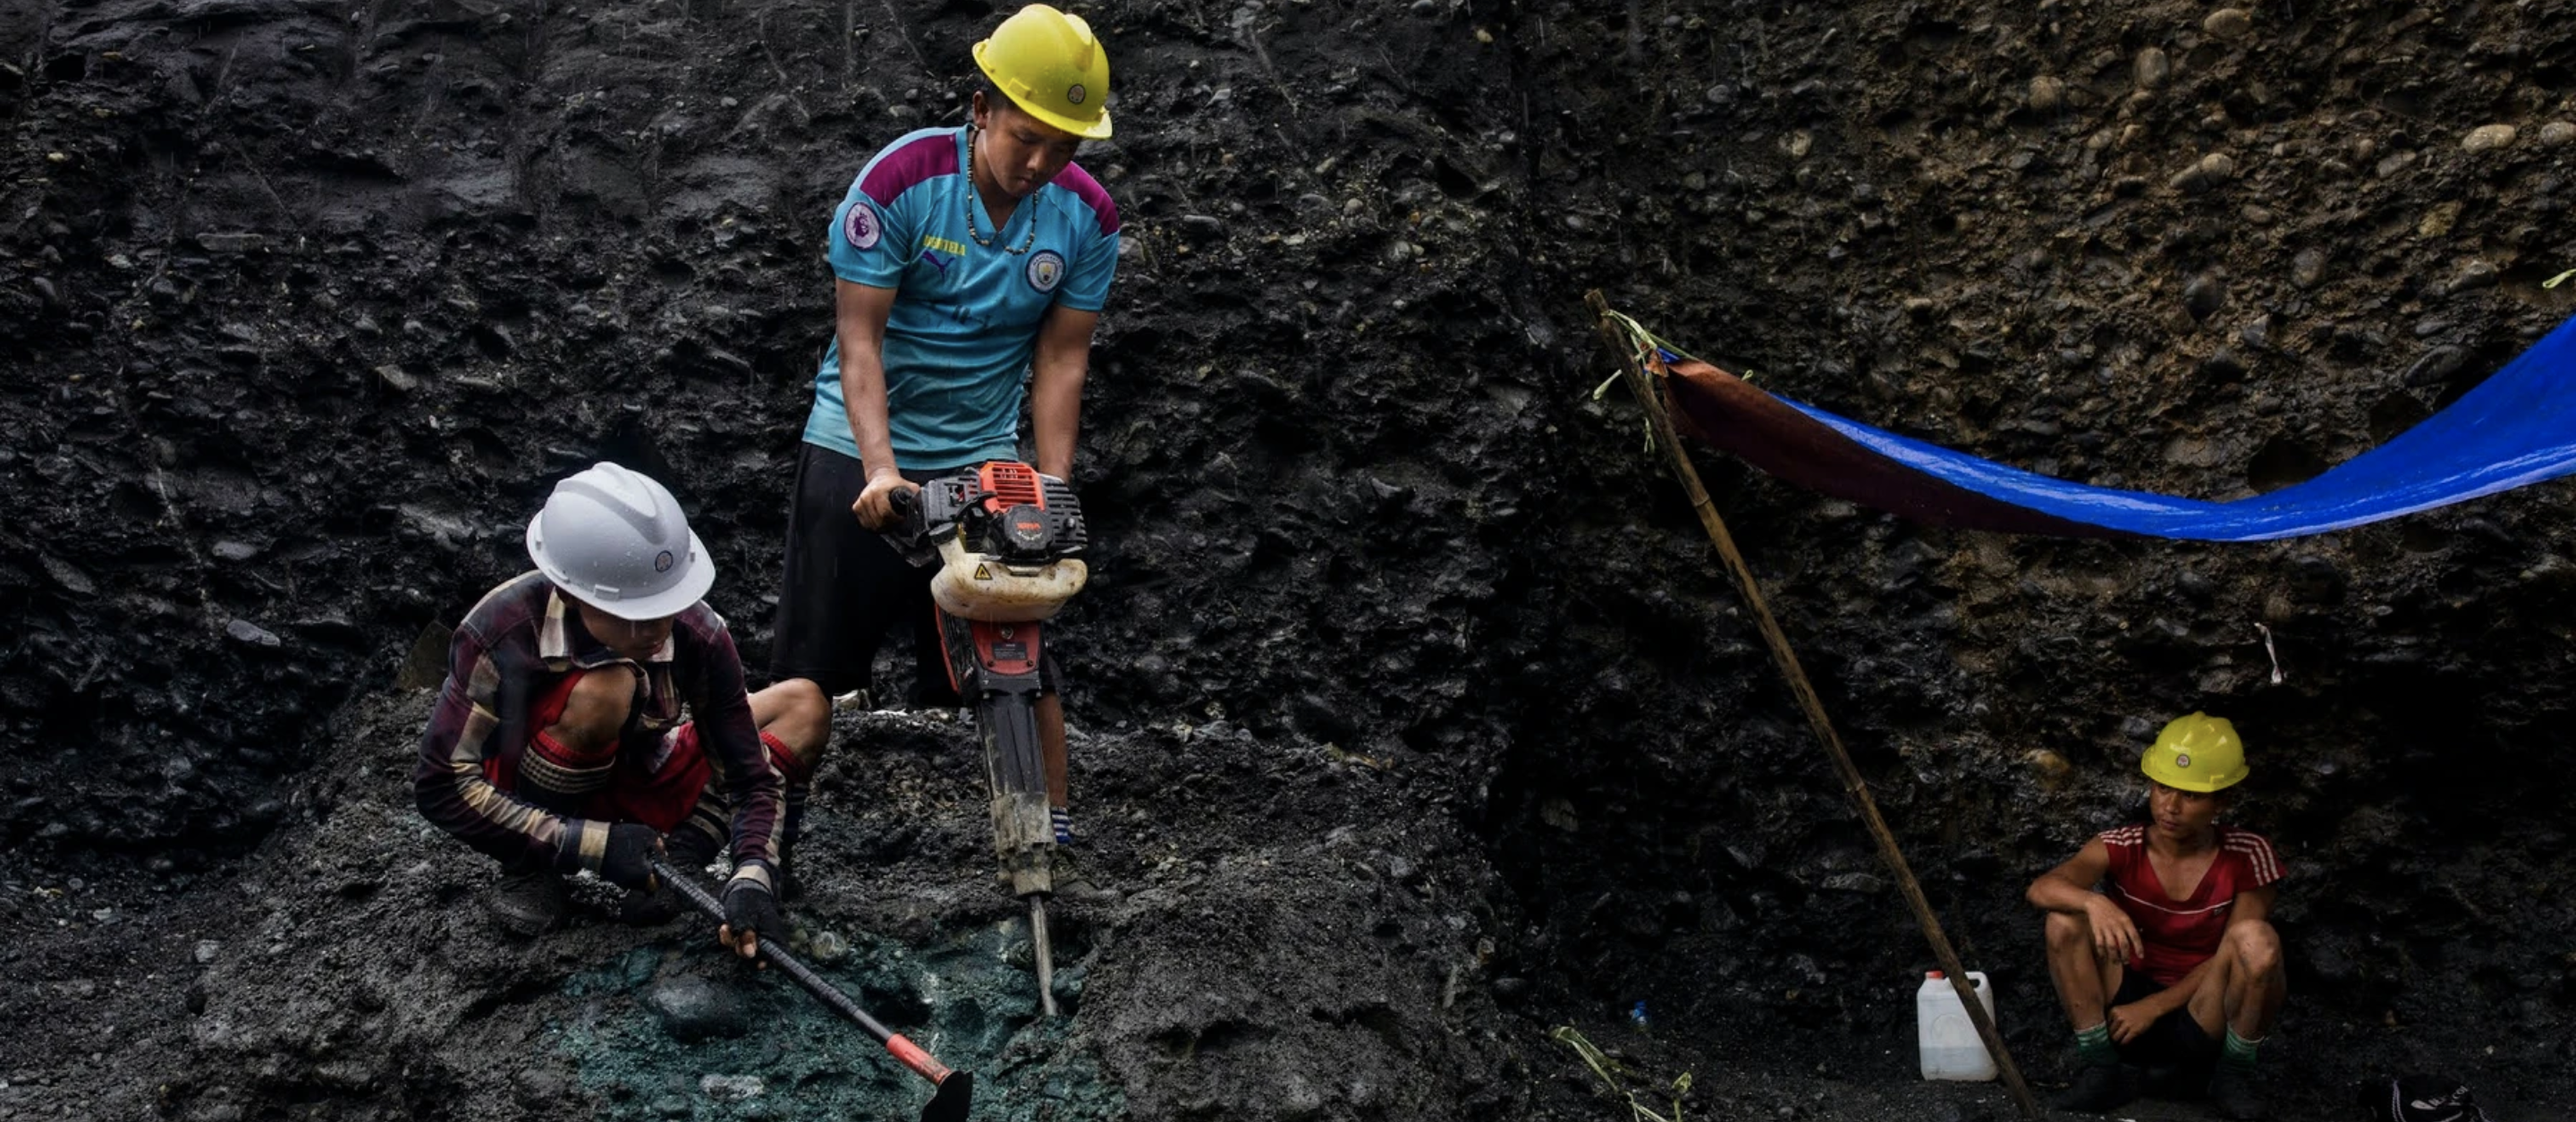 Freelance miners use jackhammers to search for jade in a Myanmar mine. Image by Hkun Lat. Myanmar, 2020.